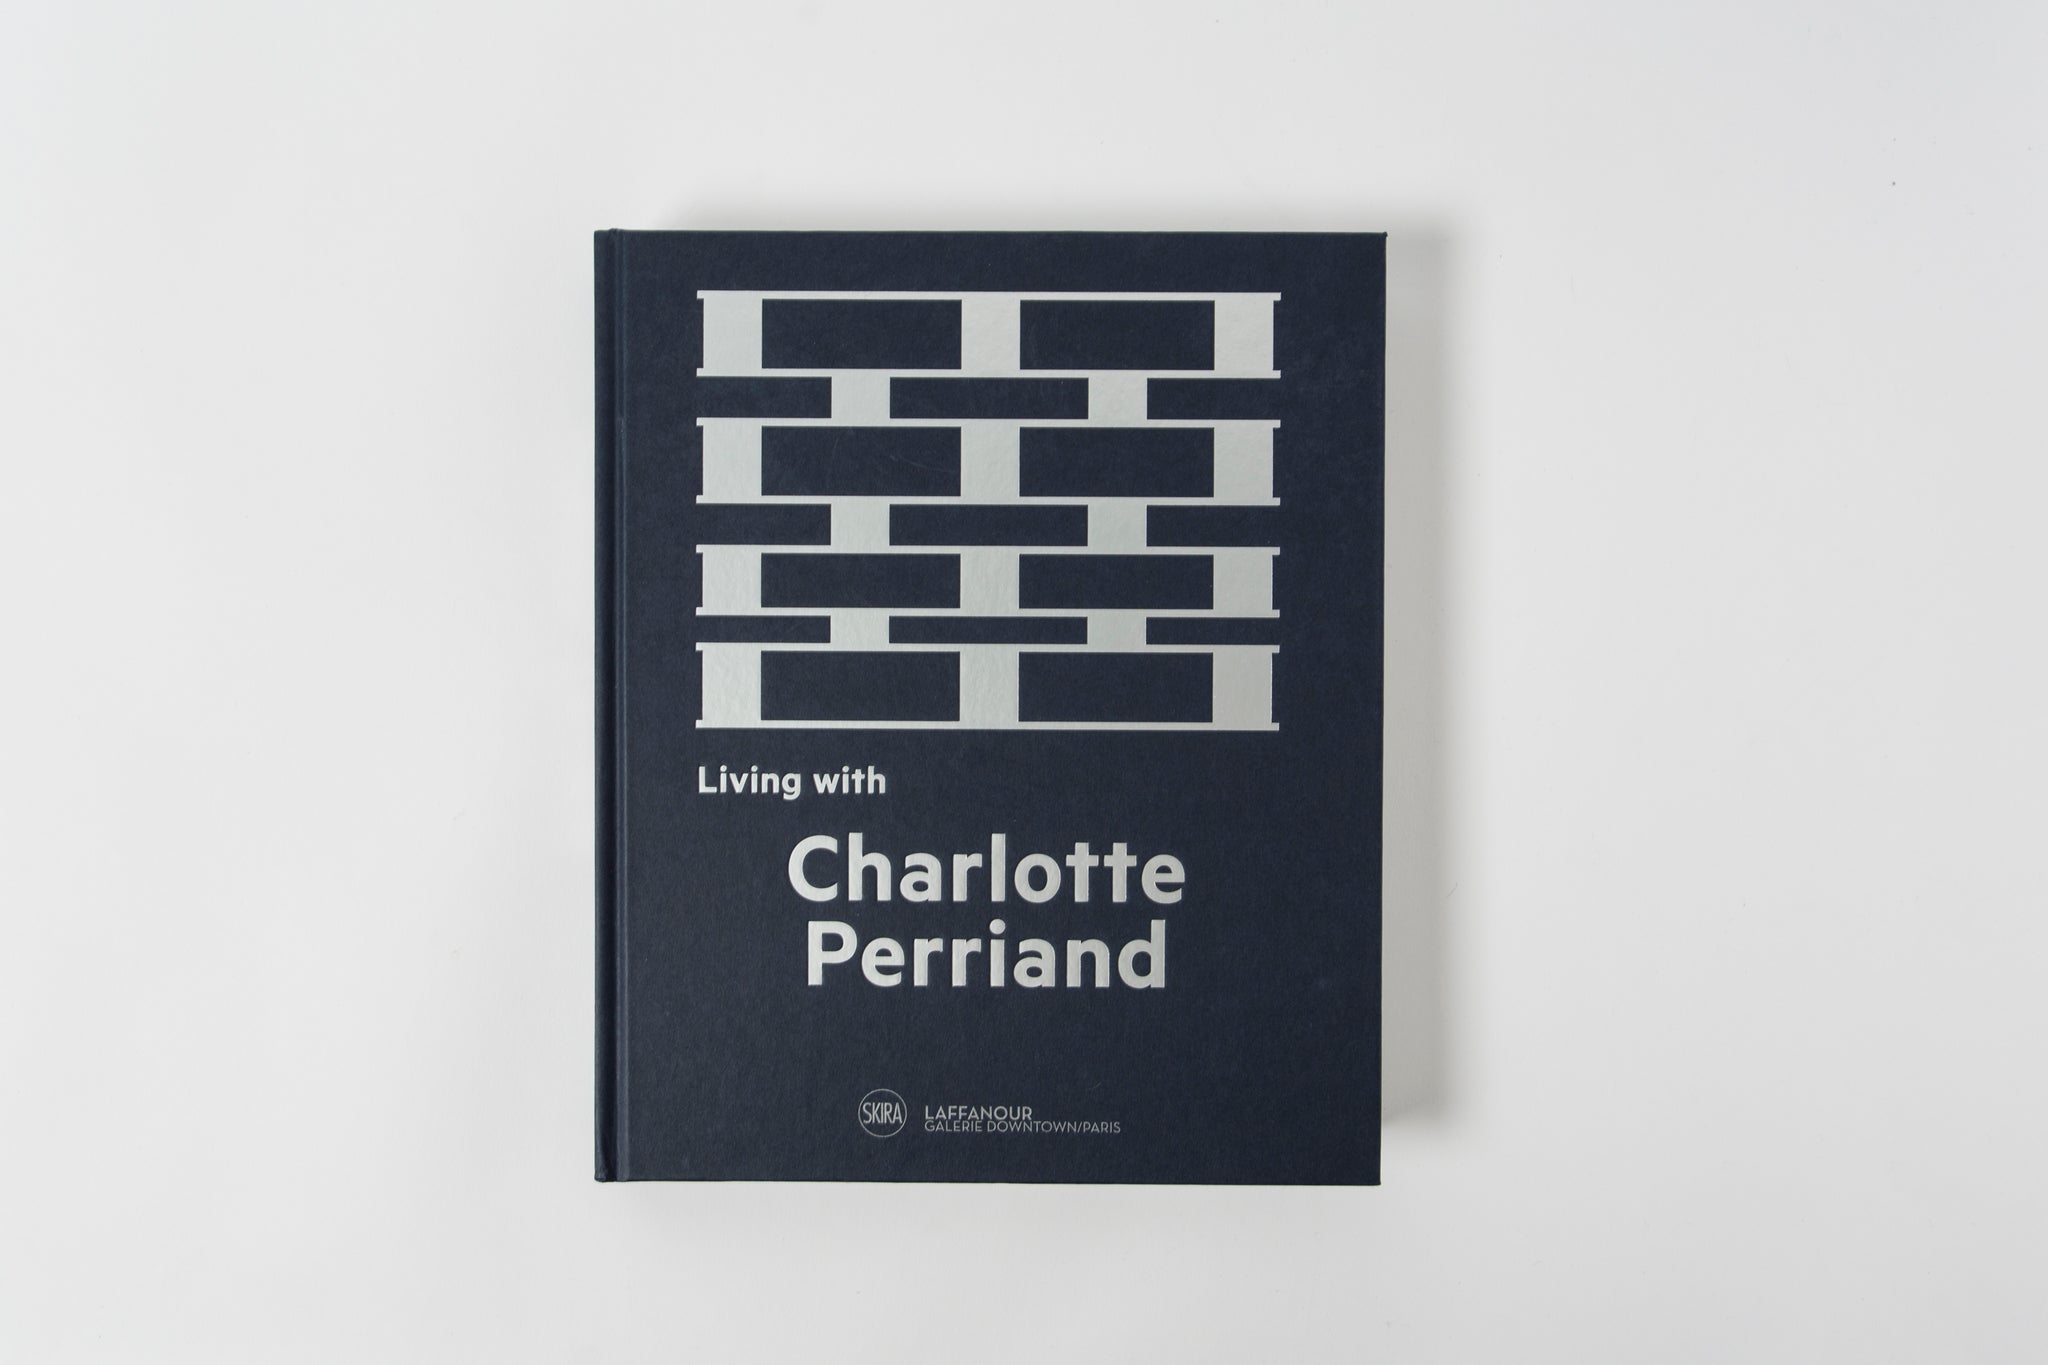 LIVING WITH CHARLOTTE PERRIAND - Laffanour